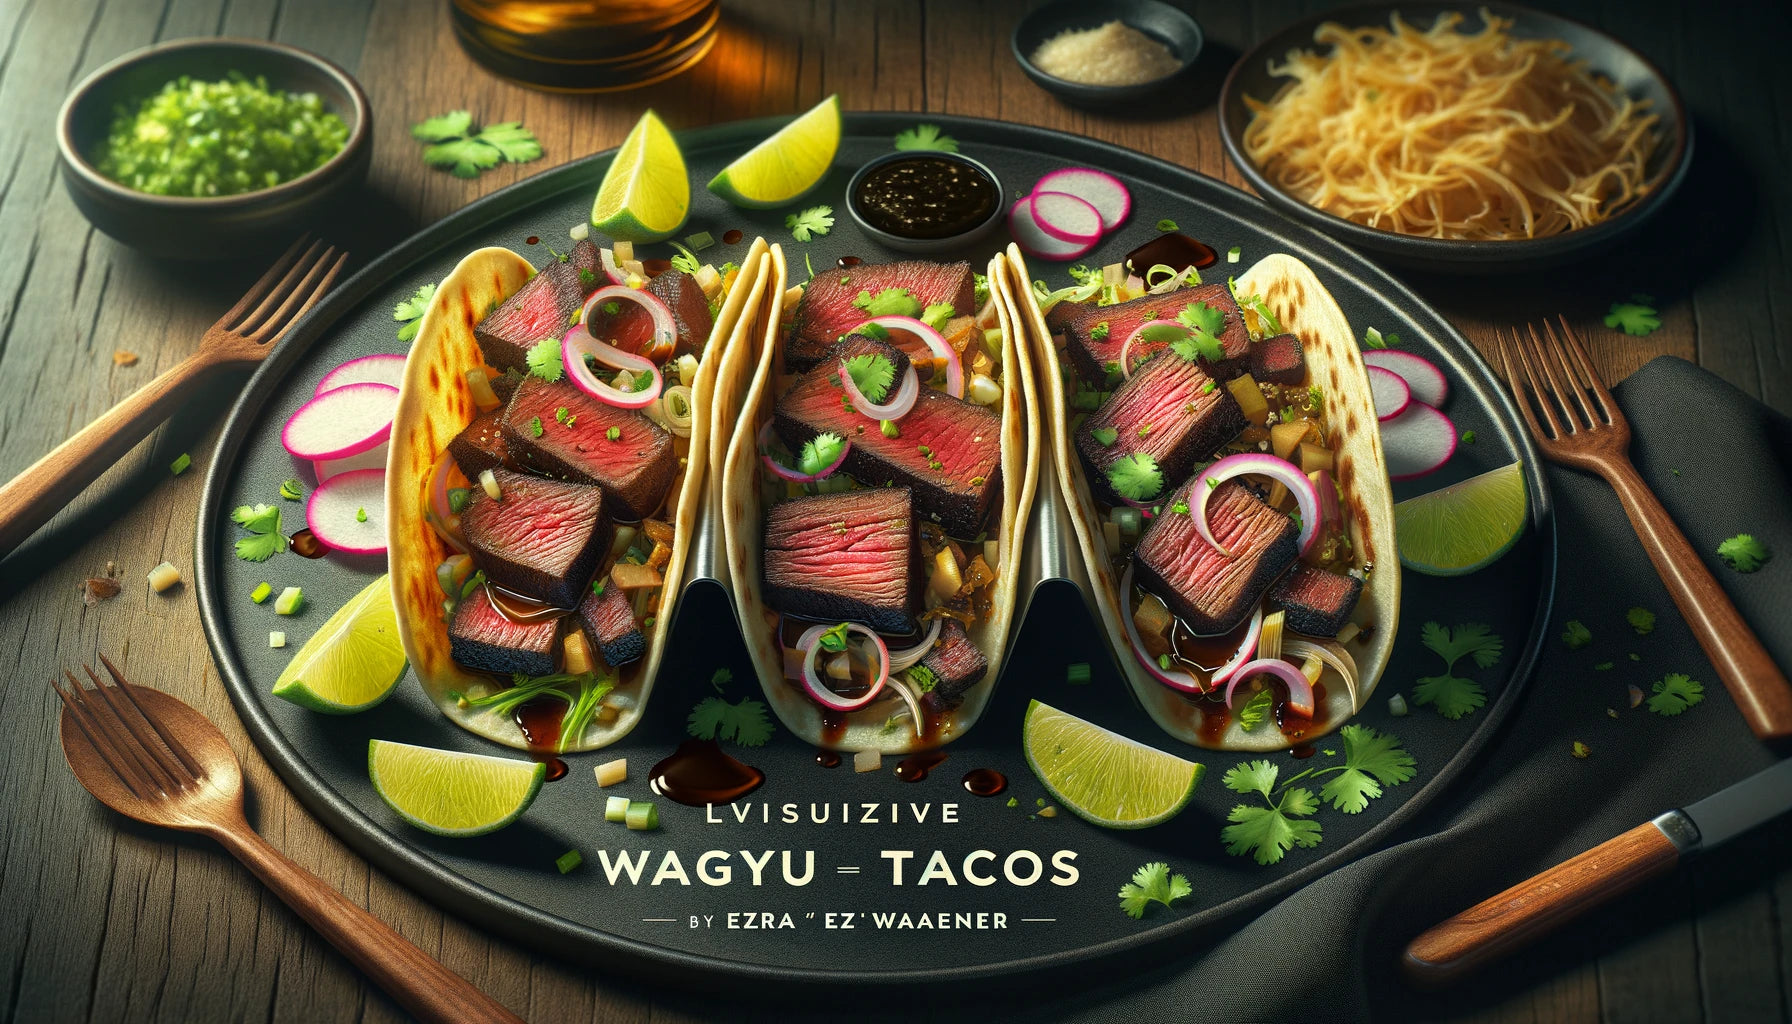 Wagyu Tacos, highlighting the refined flavors and textures with each element